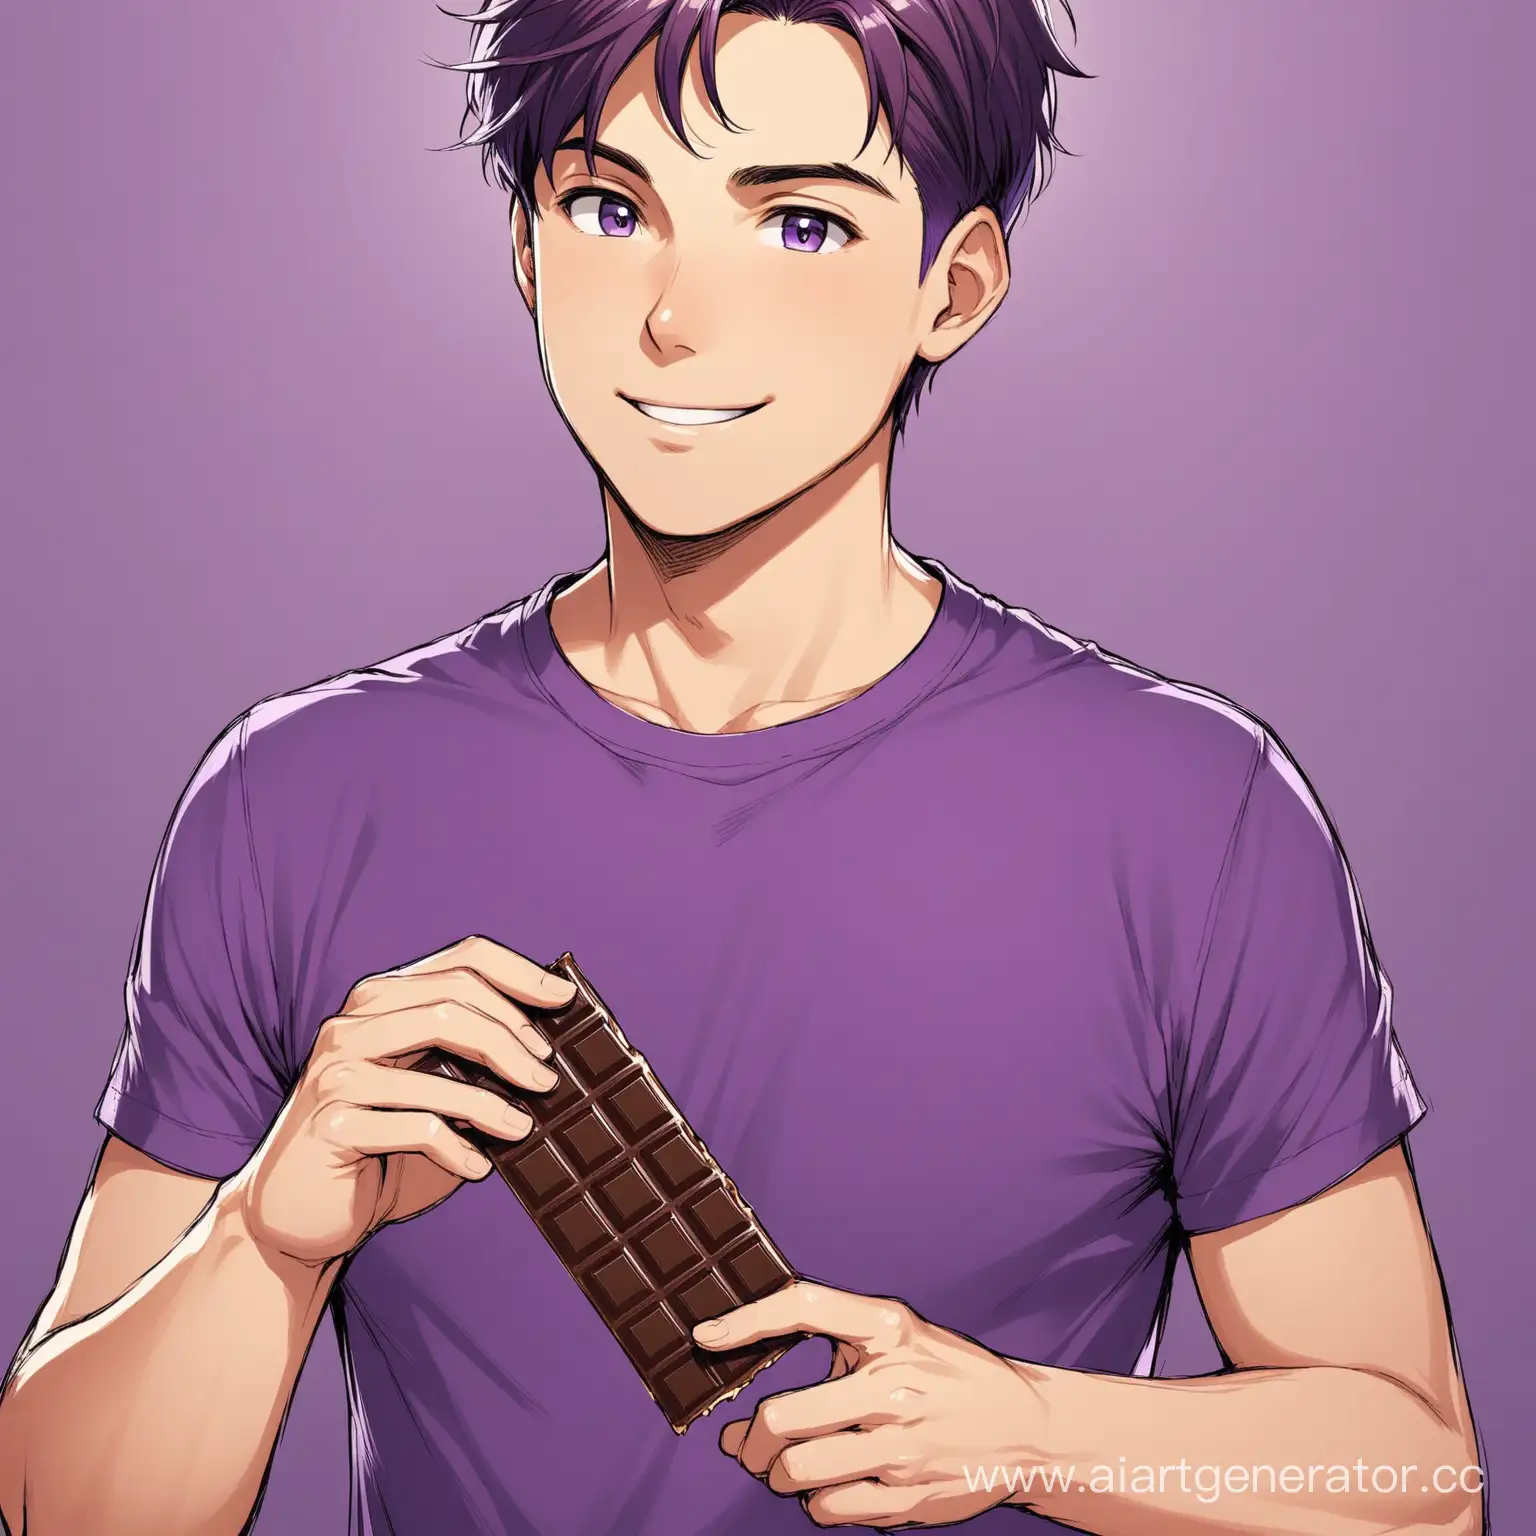 Young-Man-Holding-Chocolate-Bar-in-Purple-TShirt